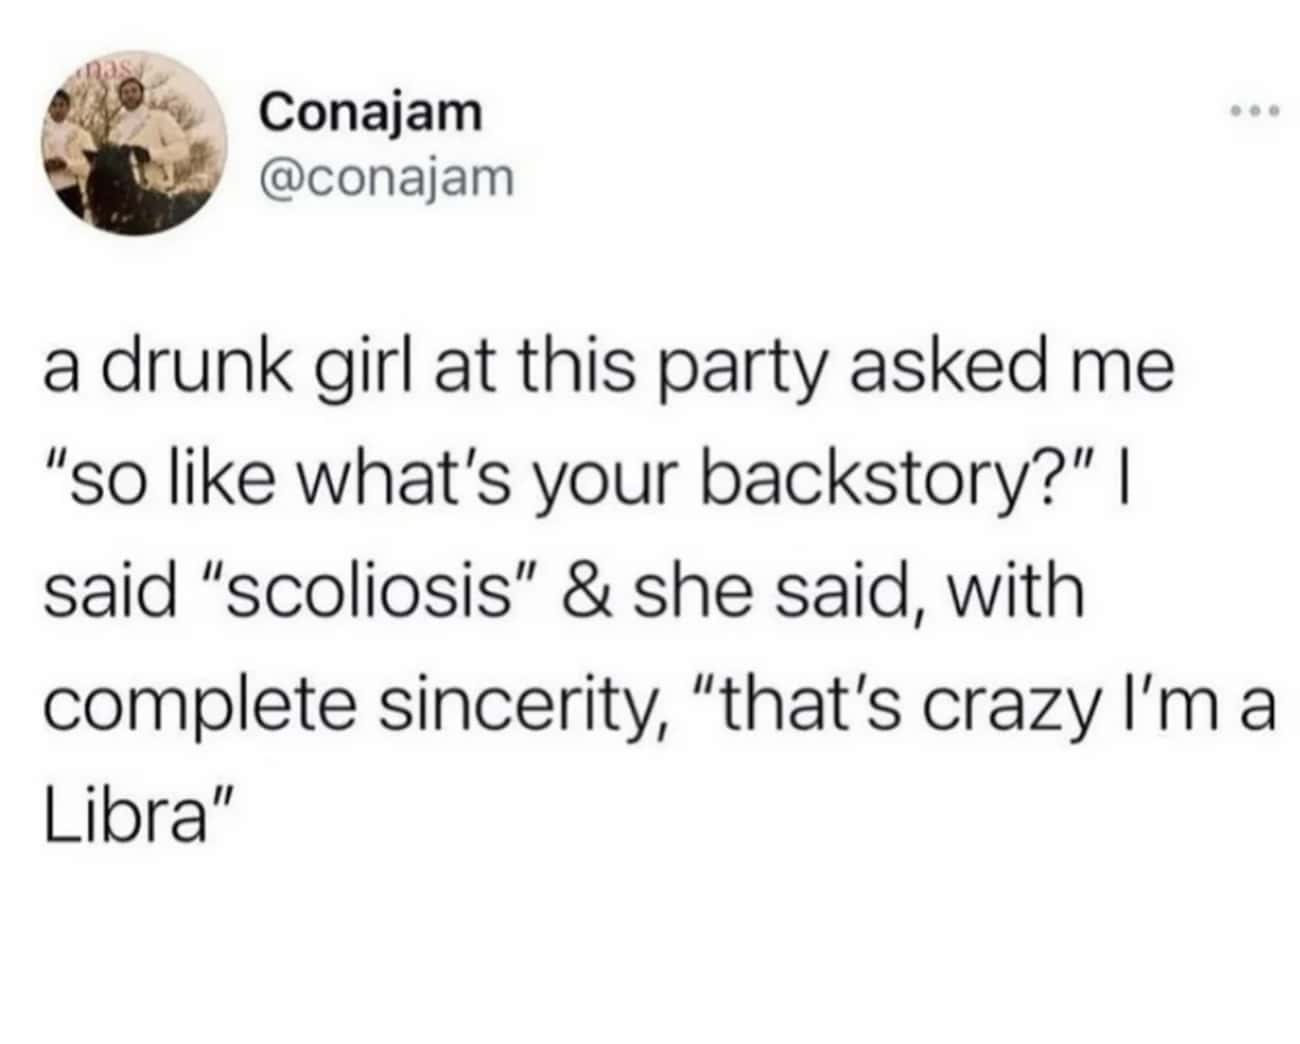 What's Your Backstory?